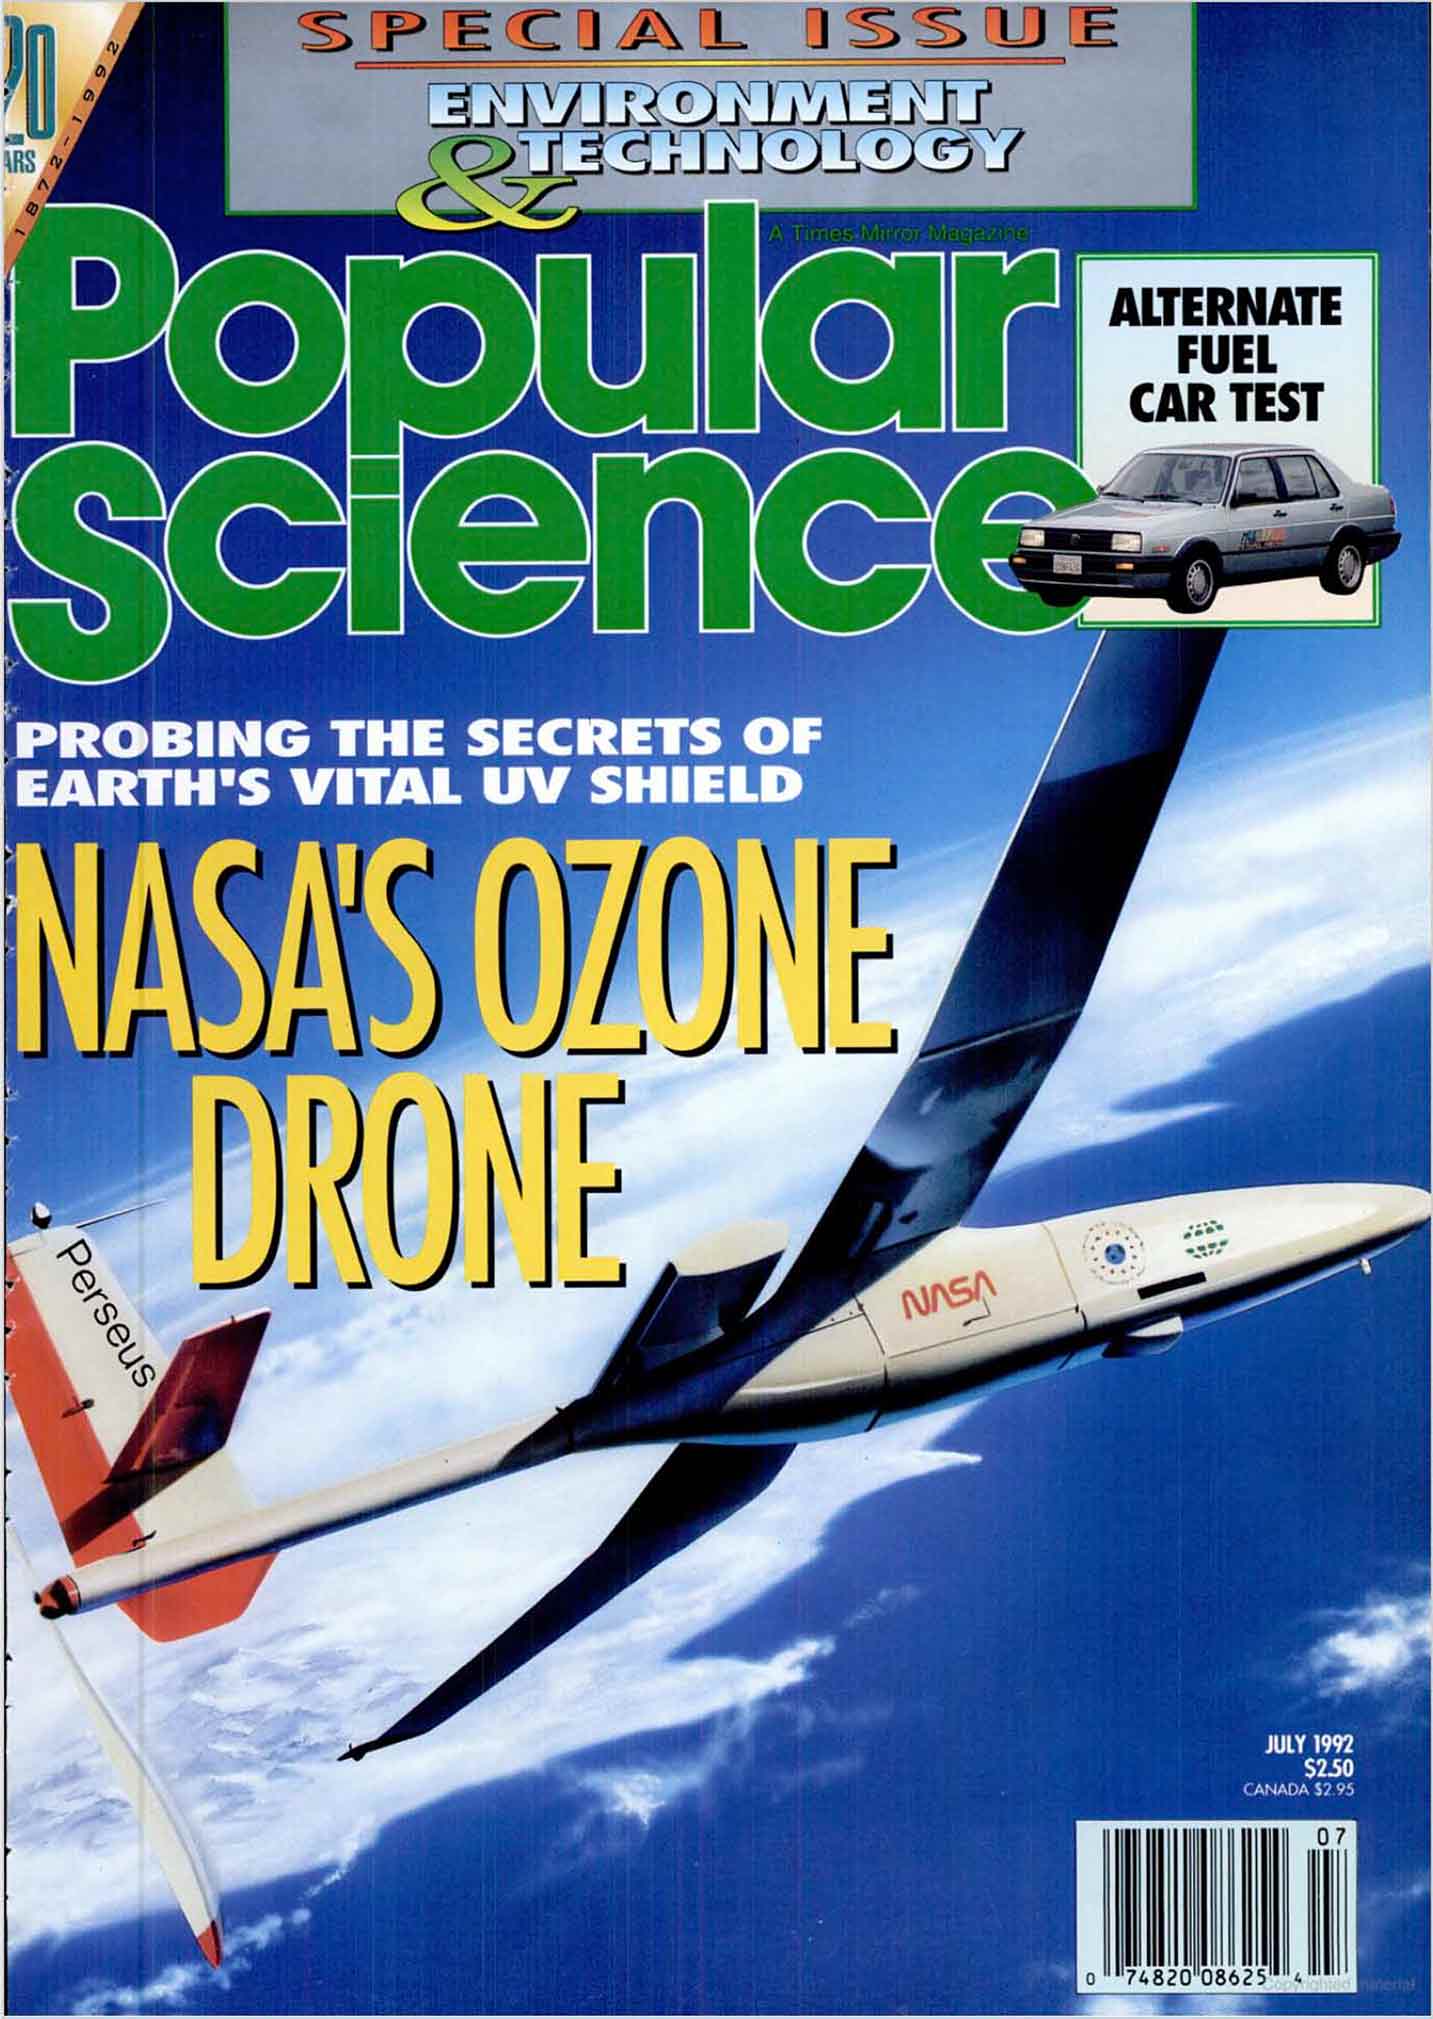 From the archives: NASA dispatches drone to help rescue the ozone layer